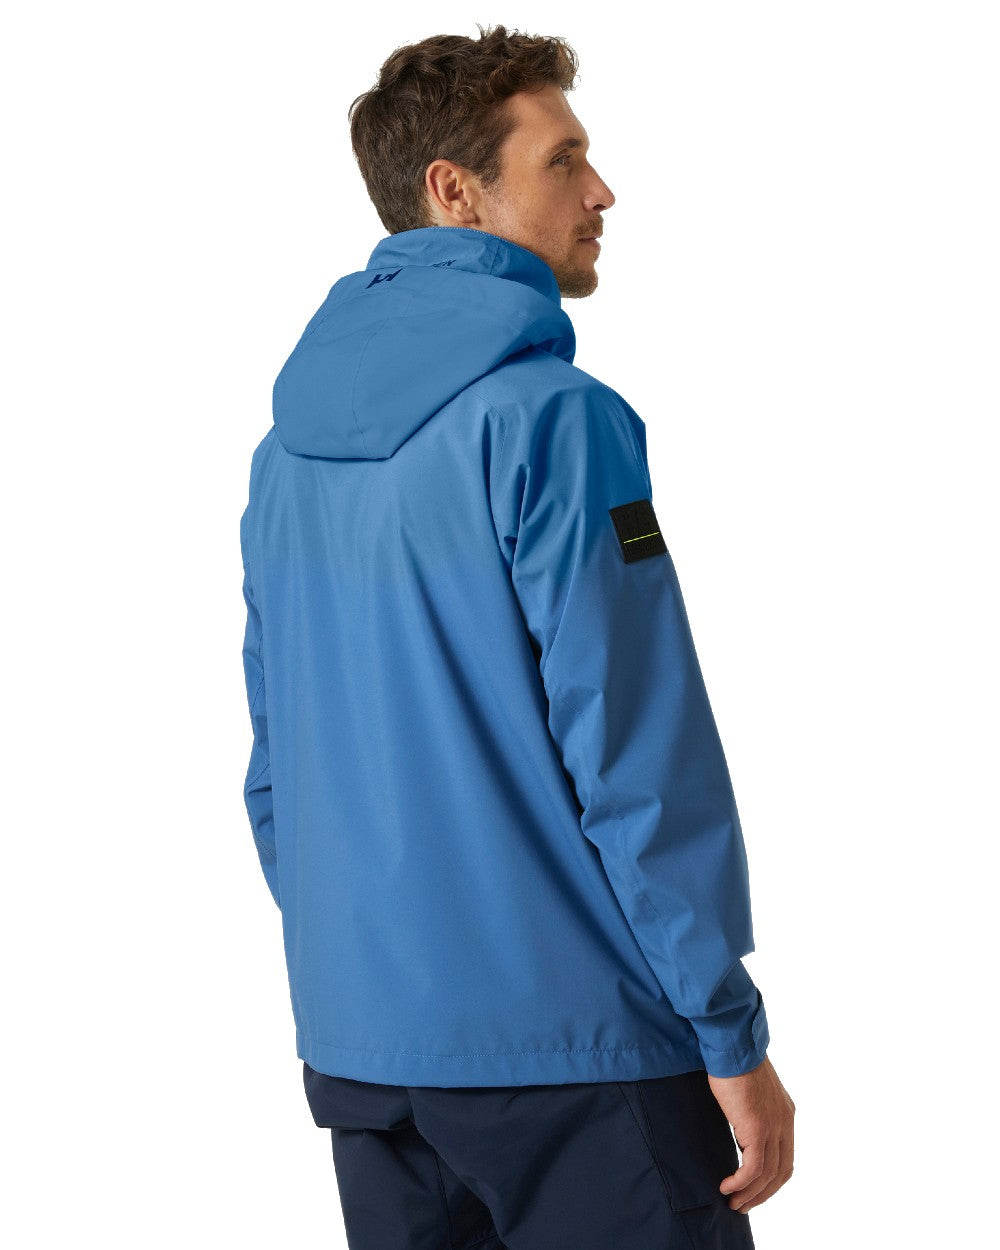 Cobalt 2.0 coloured Helly Hansen Mens HP Racing Hooded Sailing Jacket on white background 